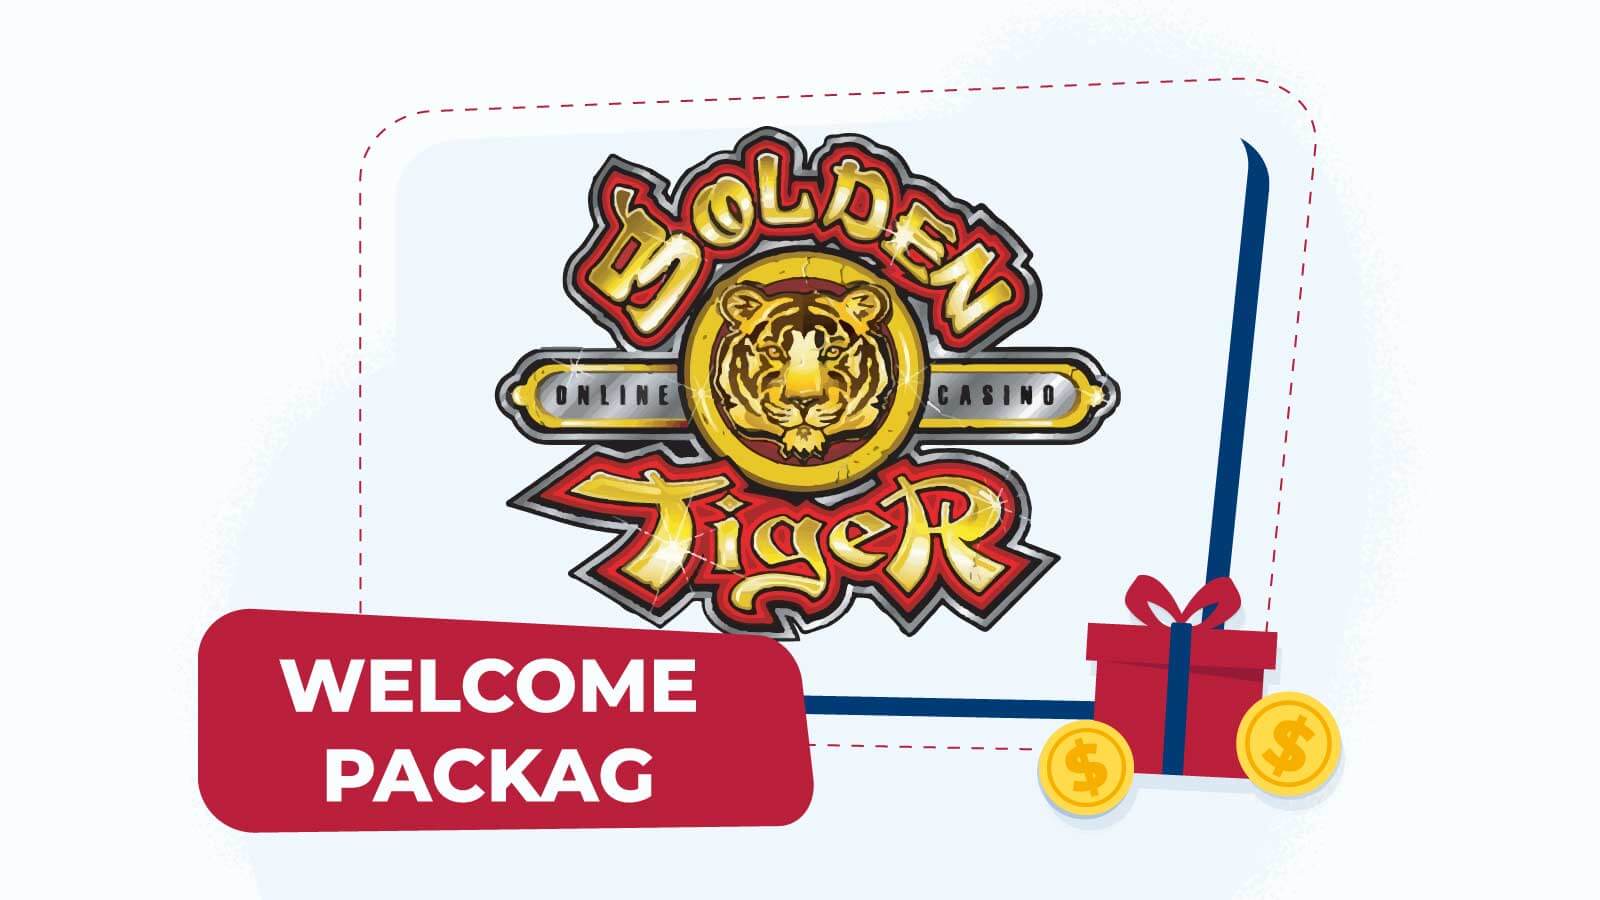 Welcome package – up to $1500 at Golden Tiger Casino